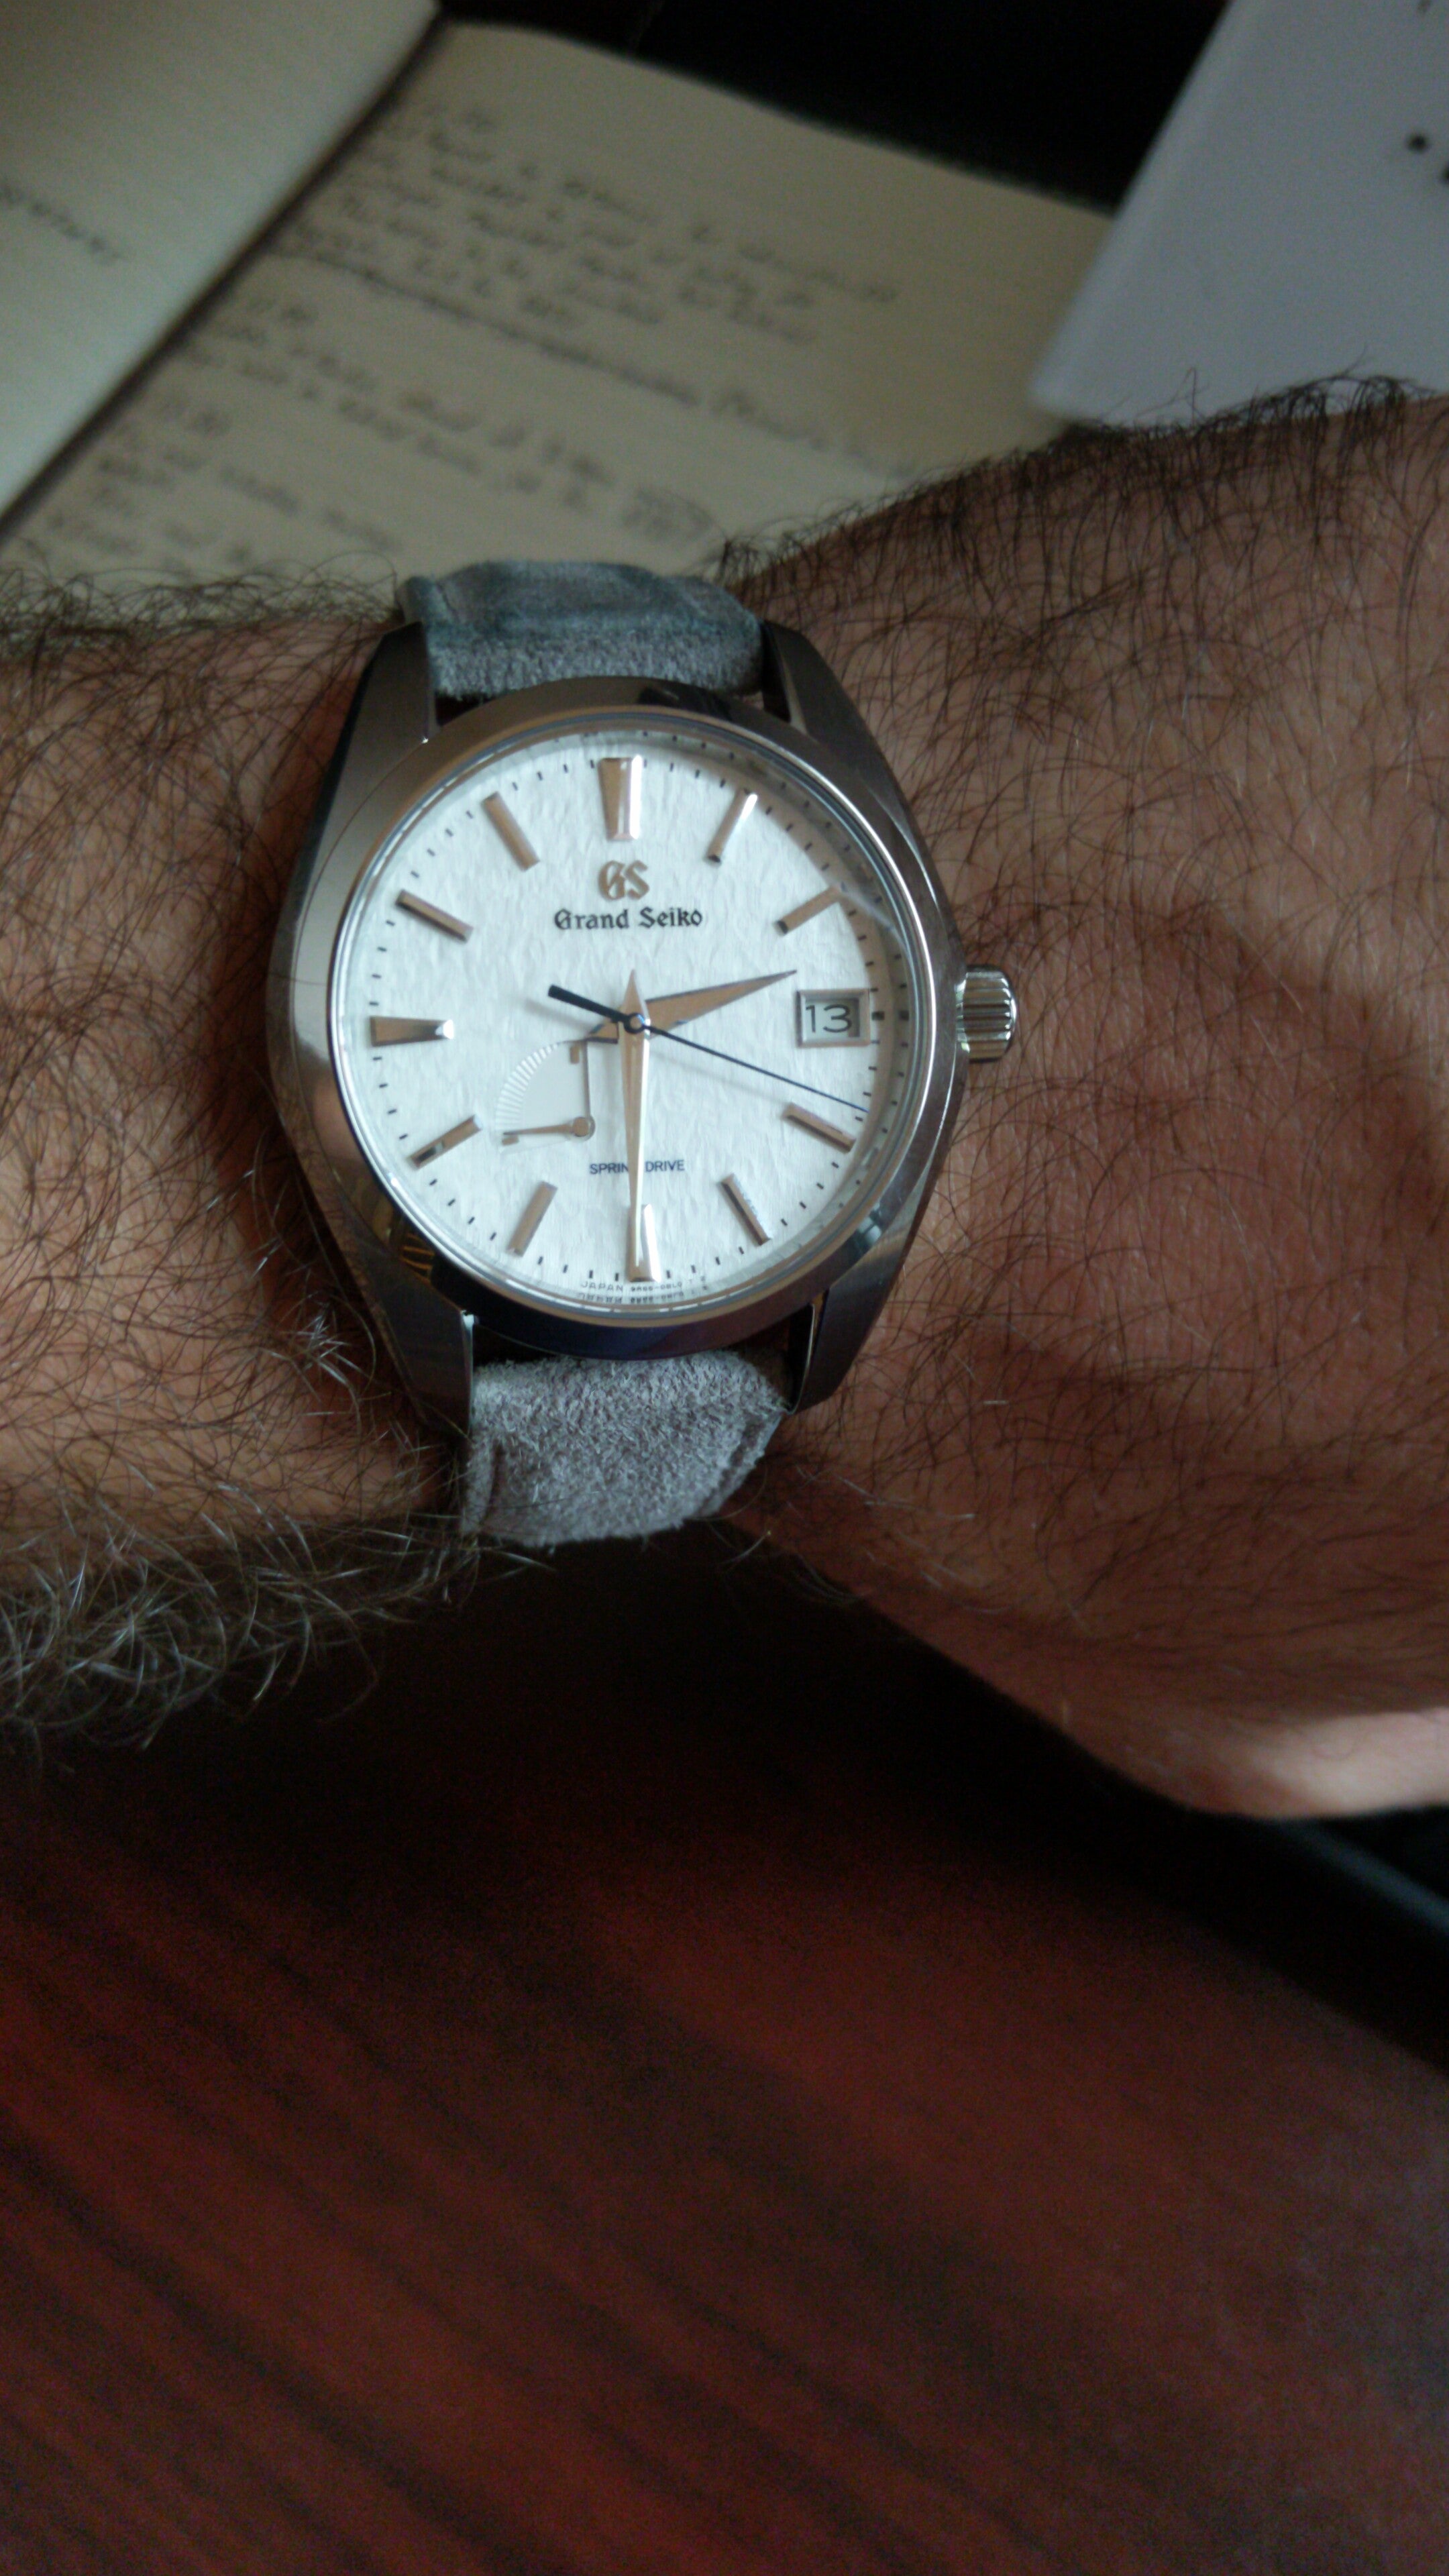 Snowflake on a leather strap? | WatchUSeek Watch Forums